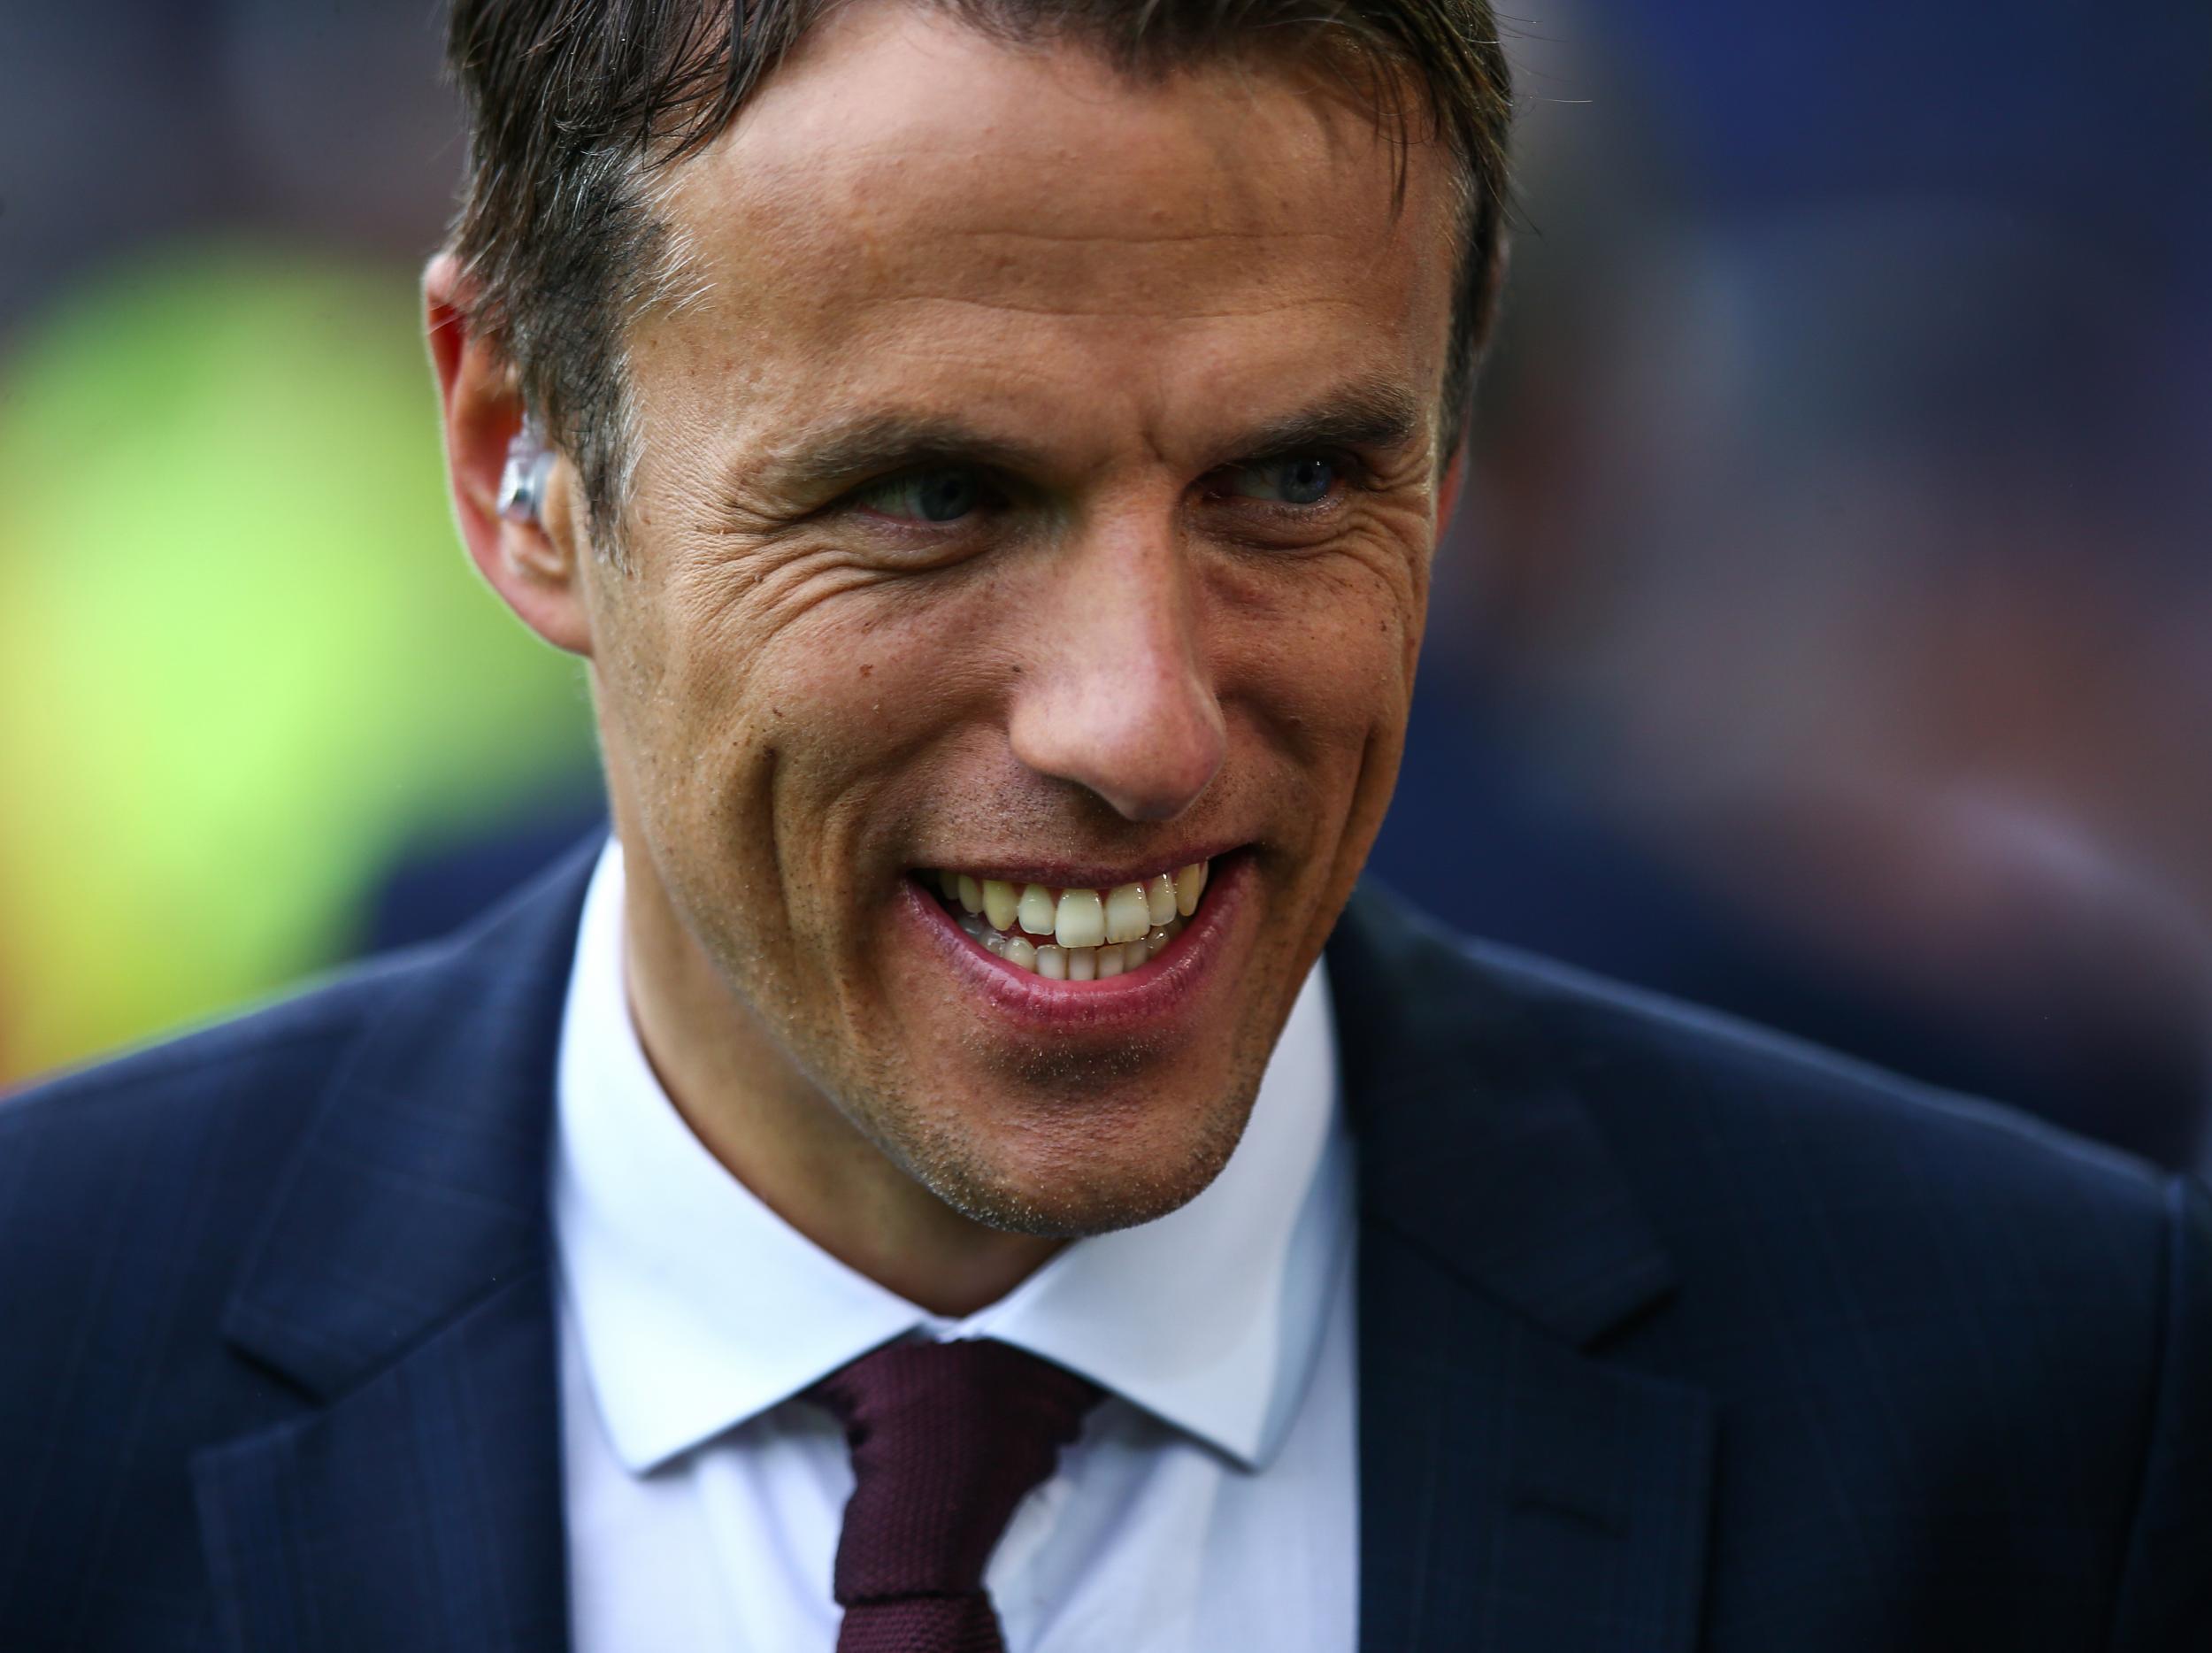 Phil Neville is the new head coach of England Women